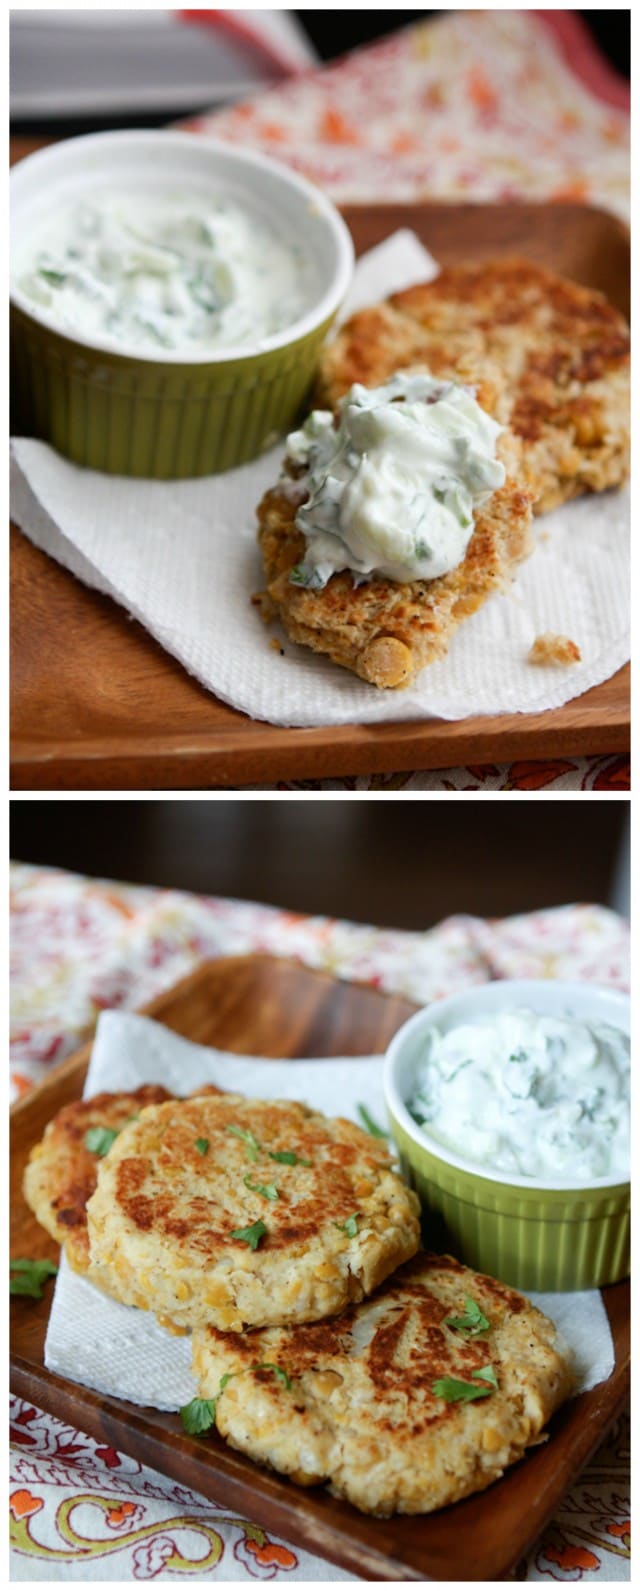 Chickpea Cakes with Cucumber-Yogurt Sauce is a flavorful vegetarian recipe your whole family will love. Made with Greek yogurt!